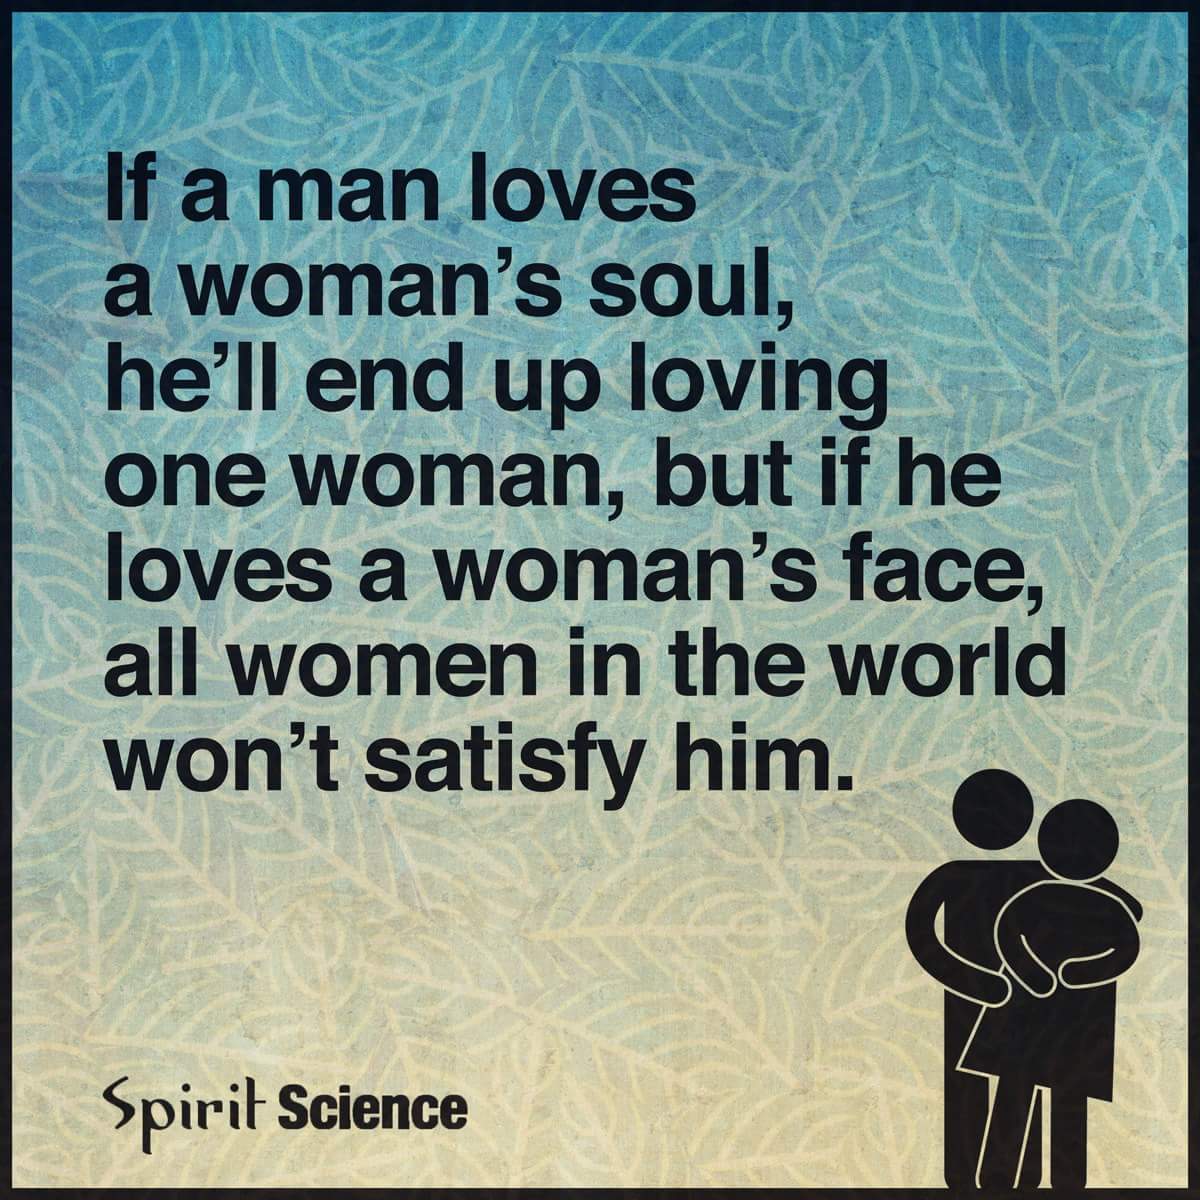 image “If a man loves